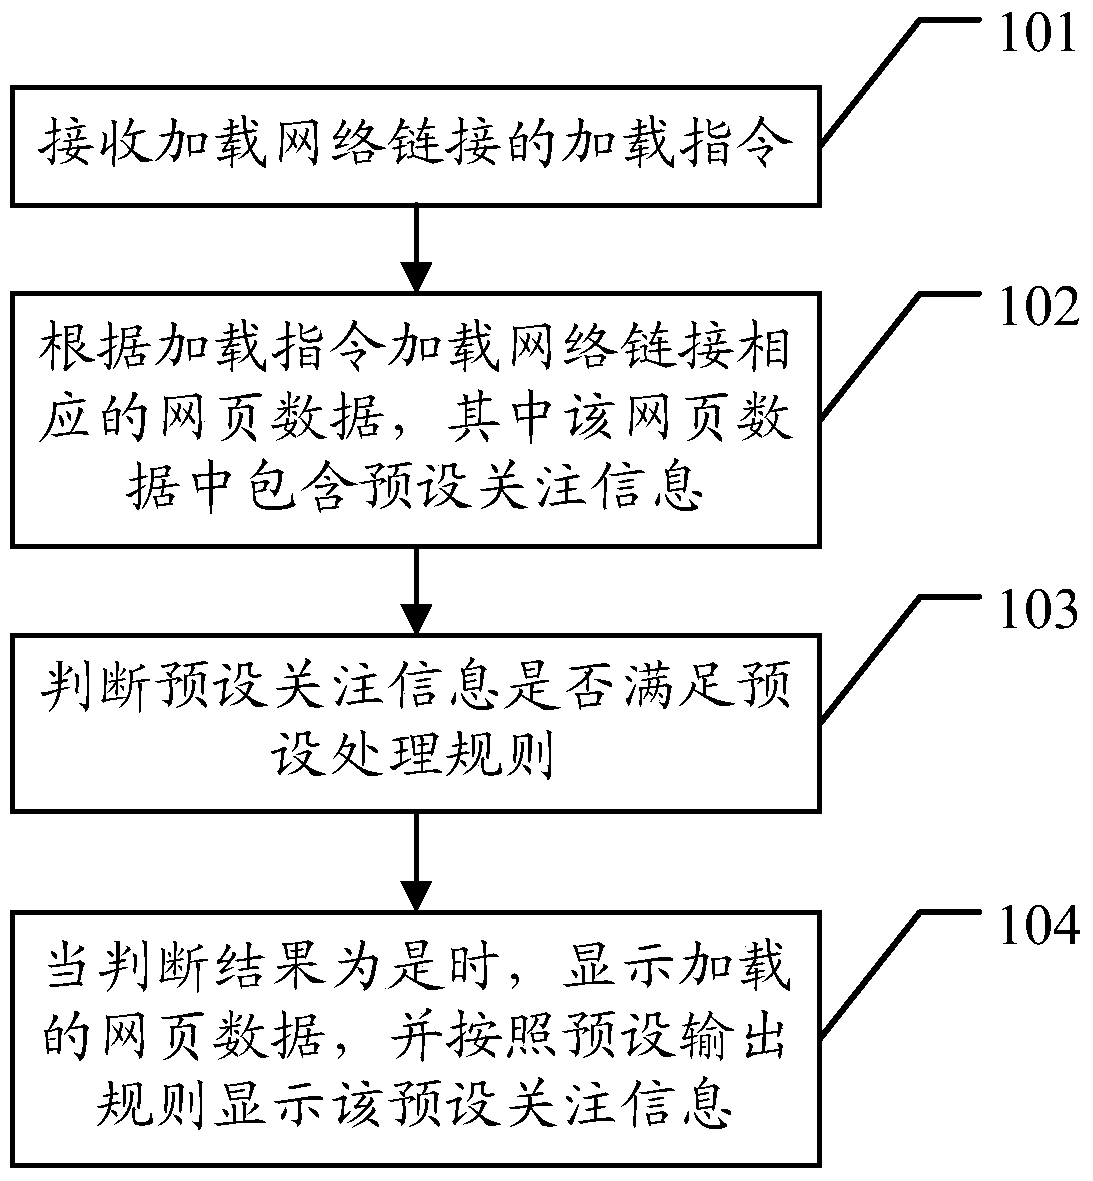 A data display method and system